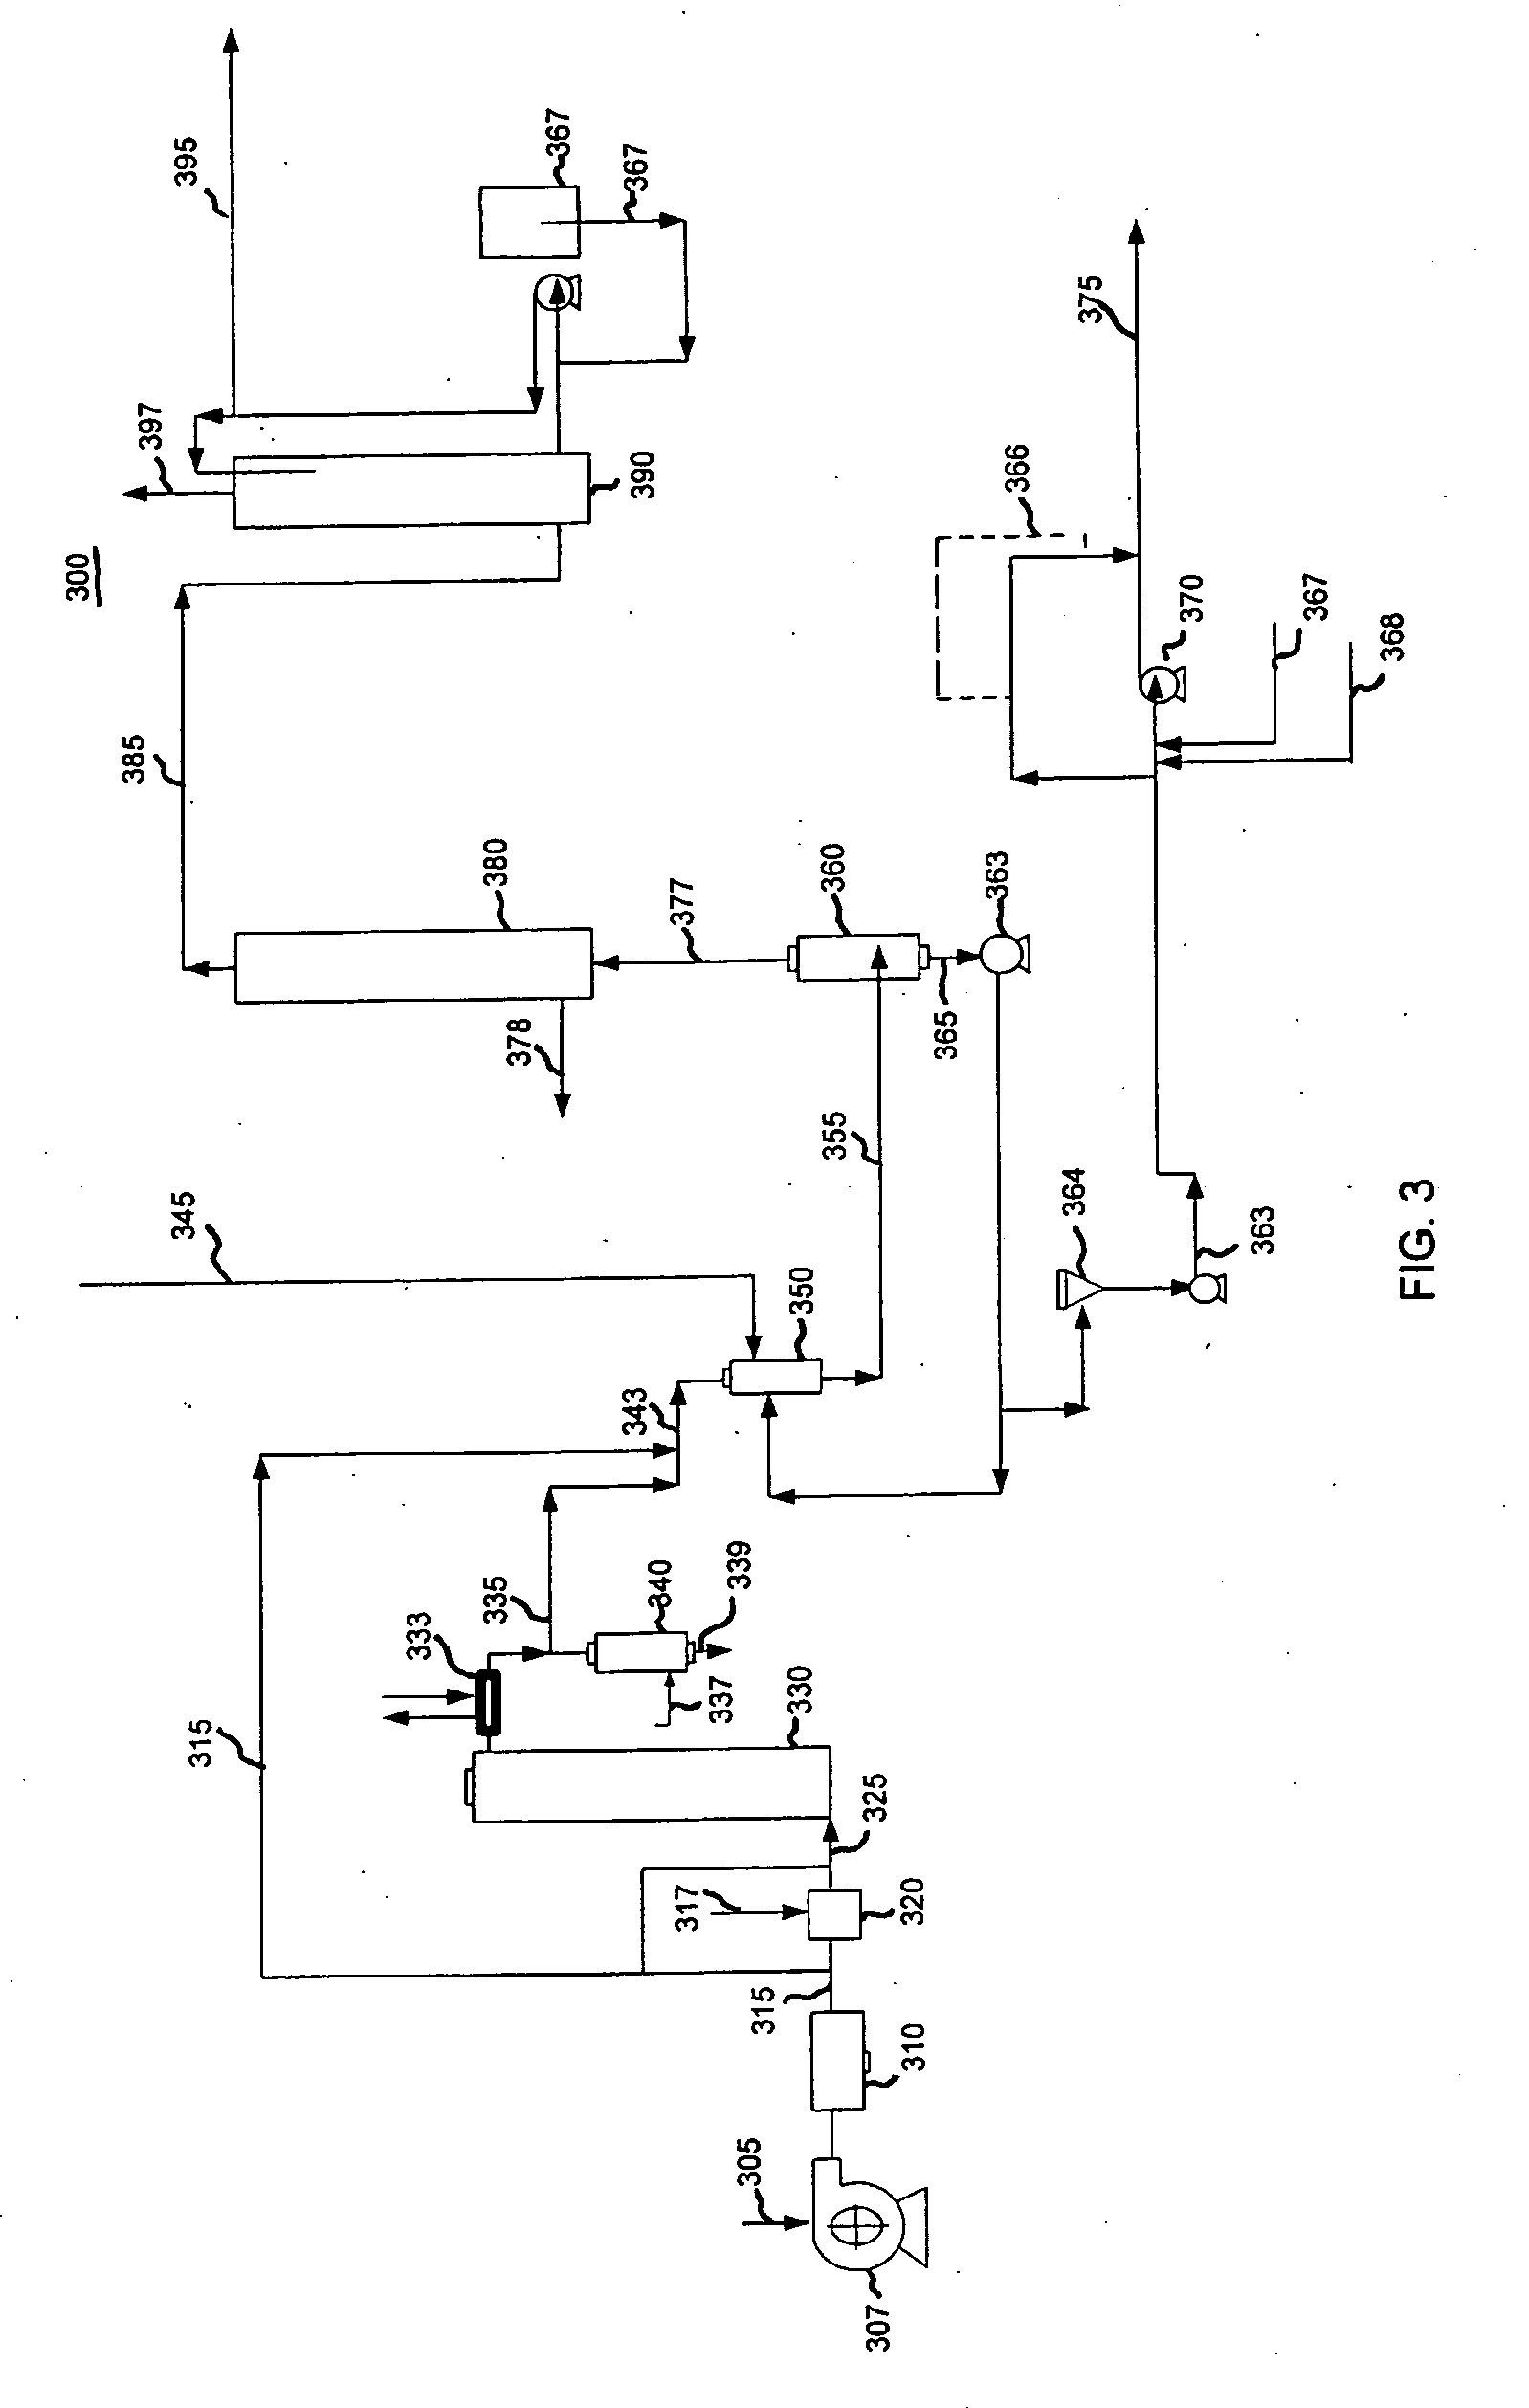 Surface active composition containing alcoholethoxy sulfate for use in laundry detergents and process for making it